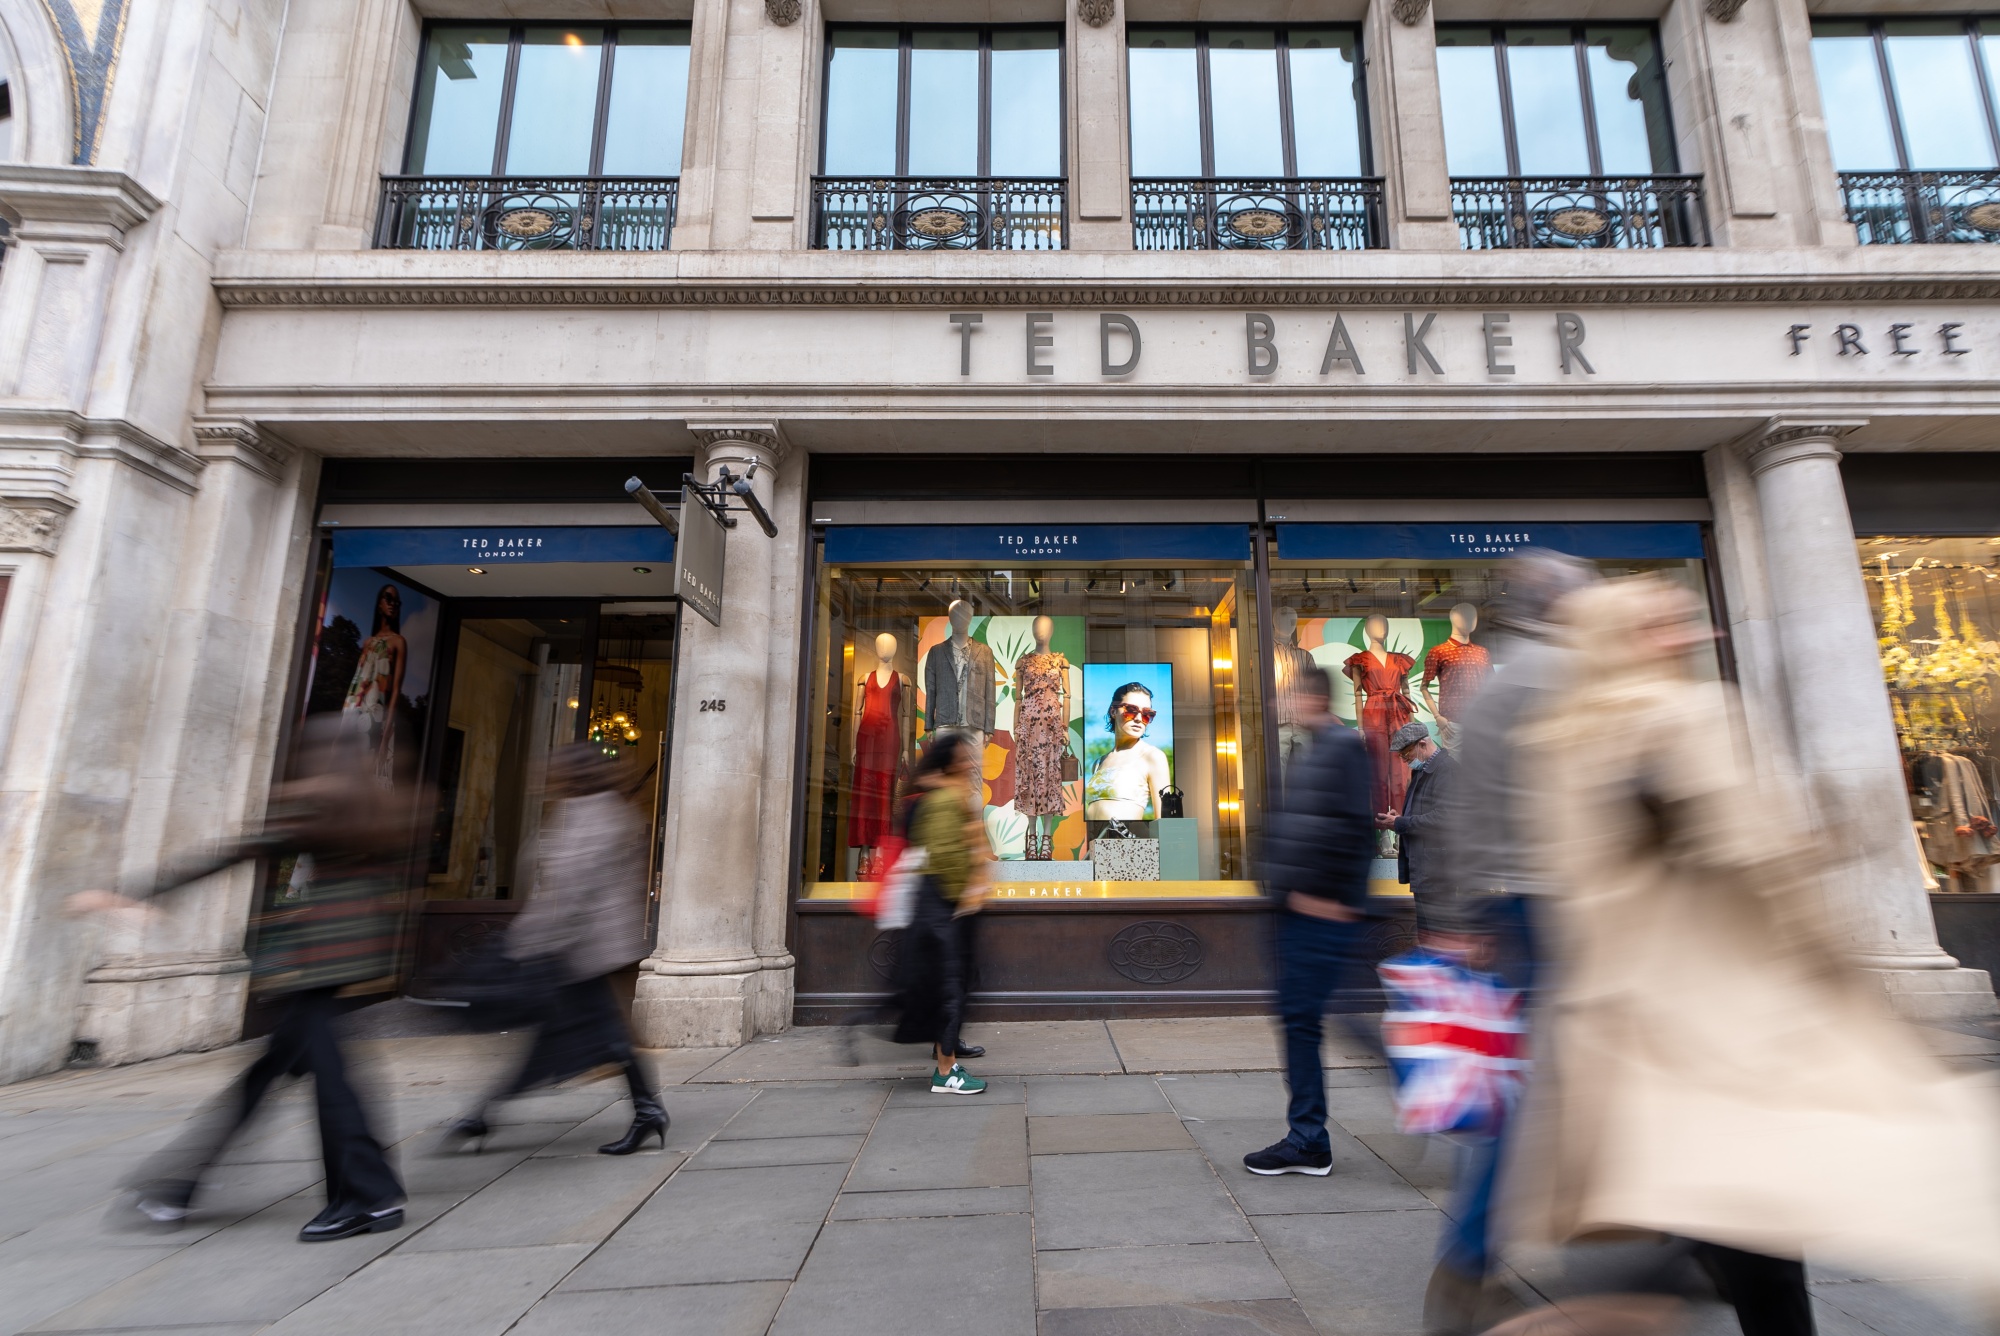 Ted Baker's UK Shops Poised to Tip into Insolvency, Risking Jobs - Bloomberg